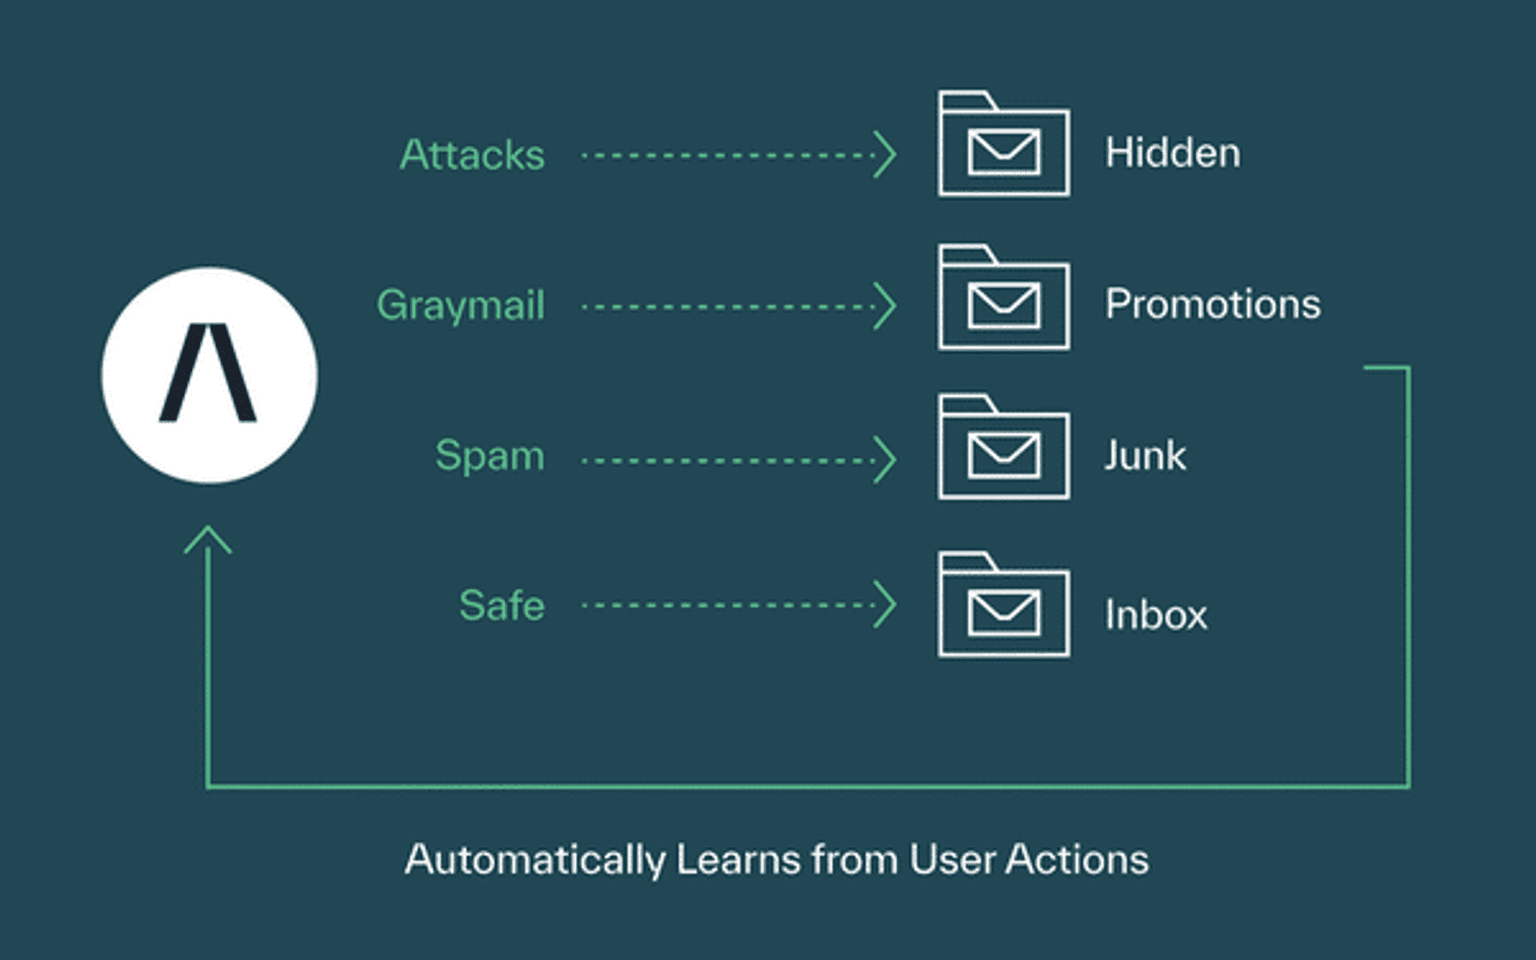 How Abnormal classifies Graymail based on user actions